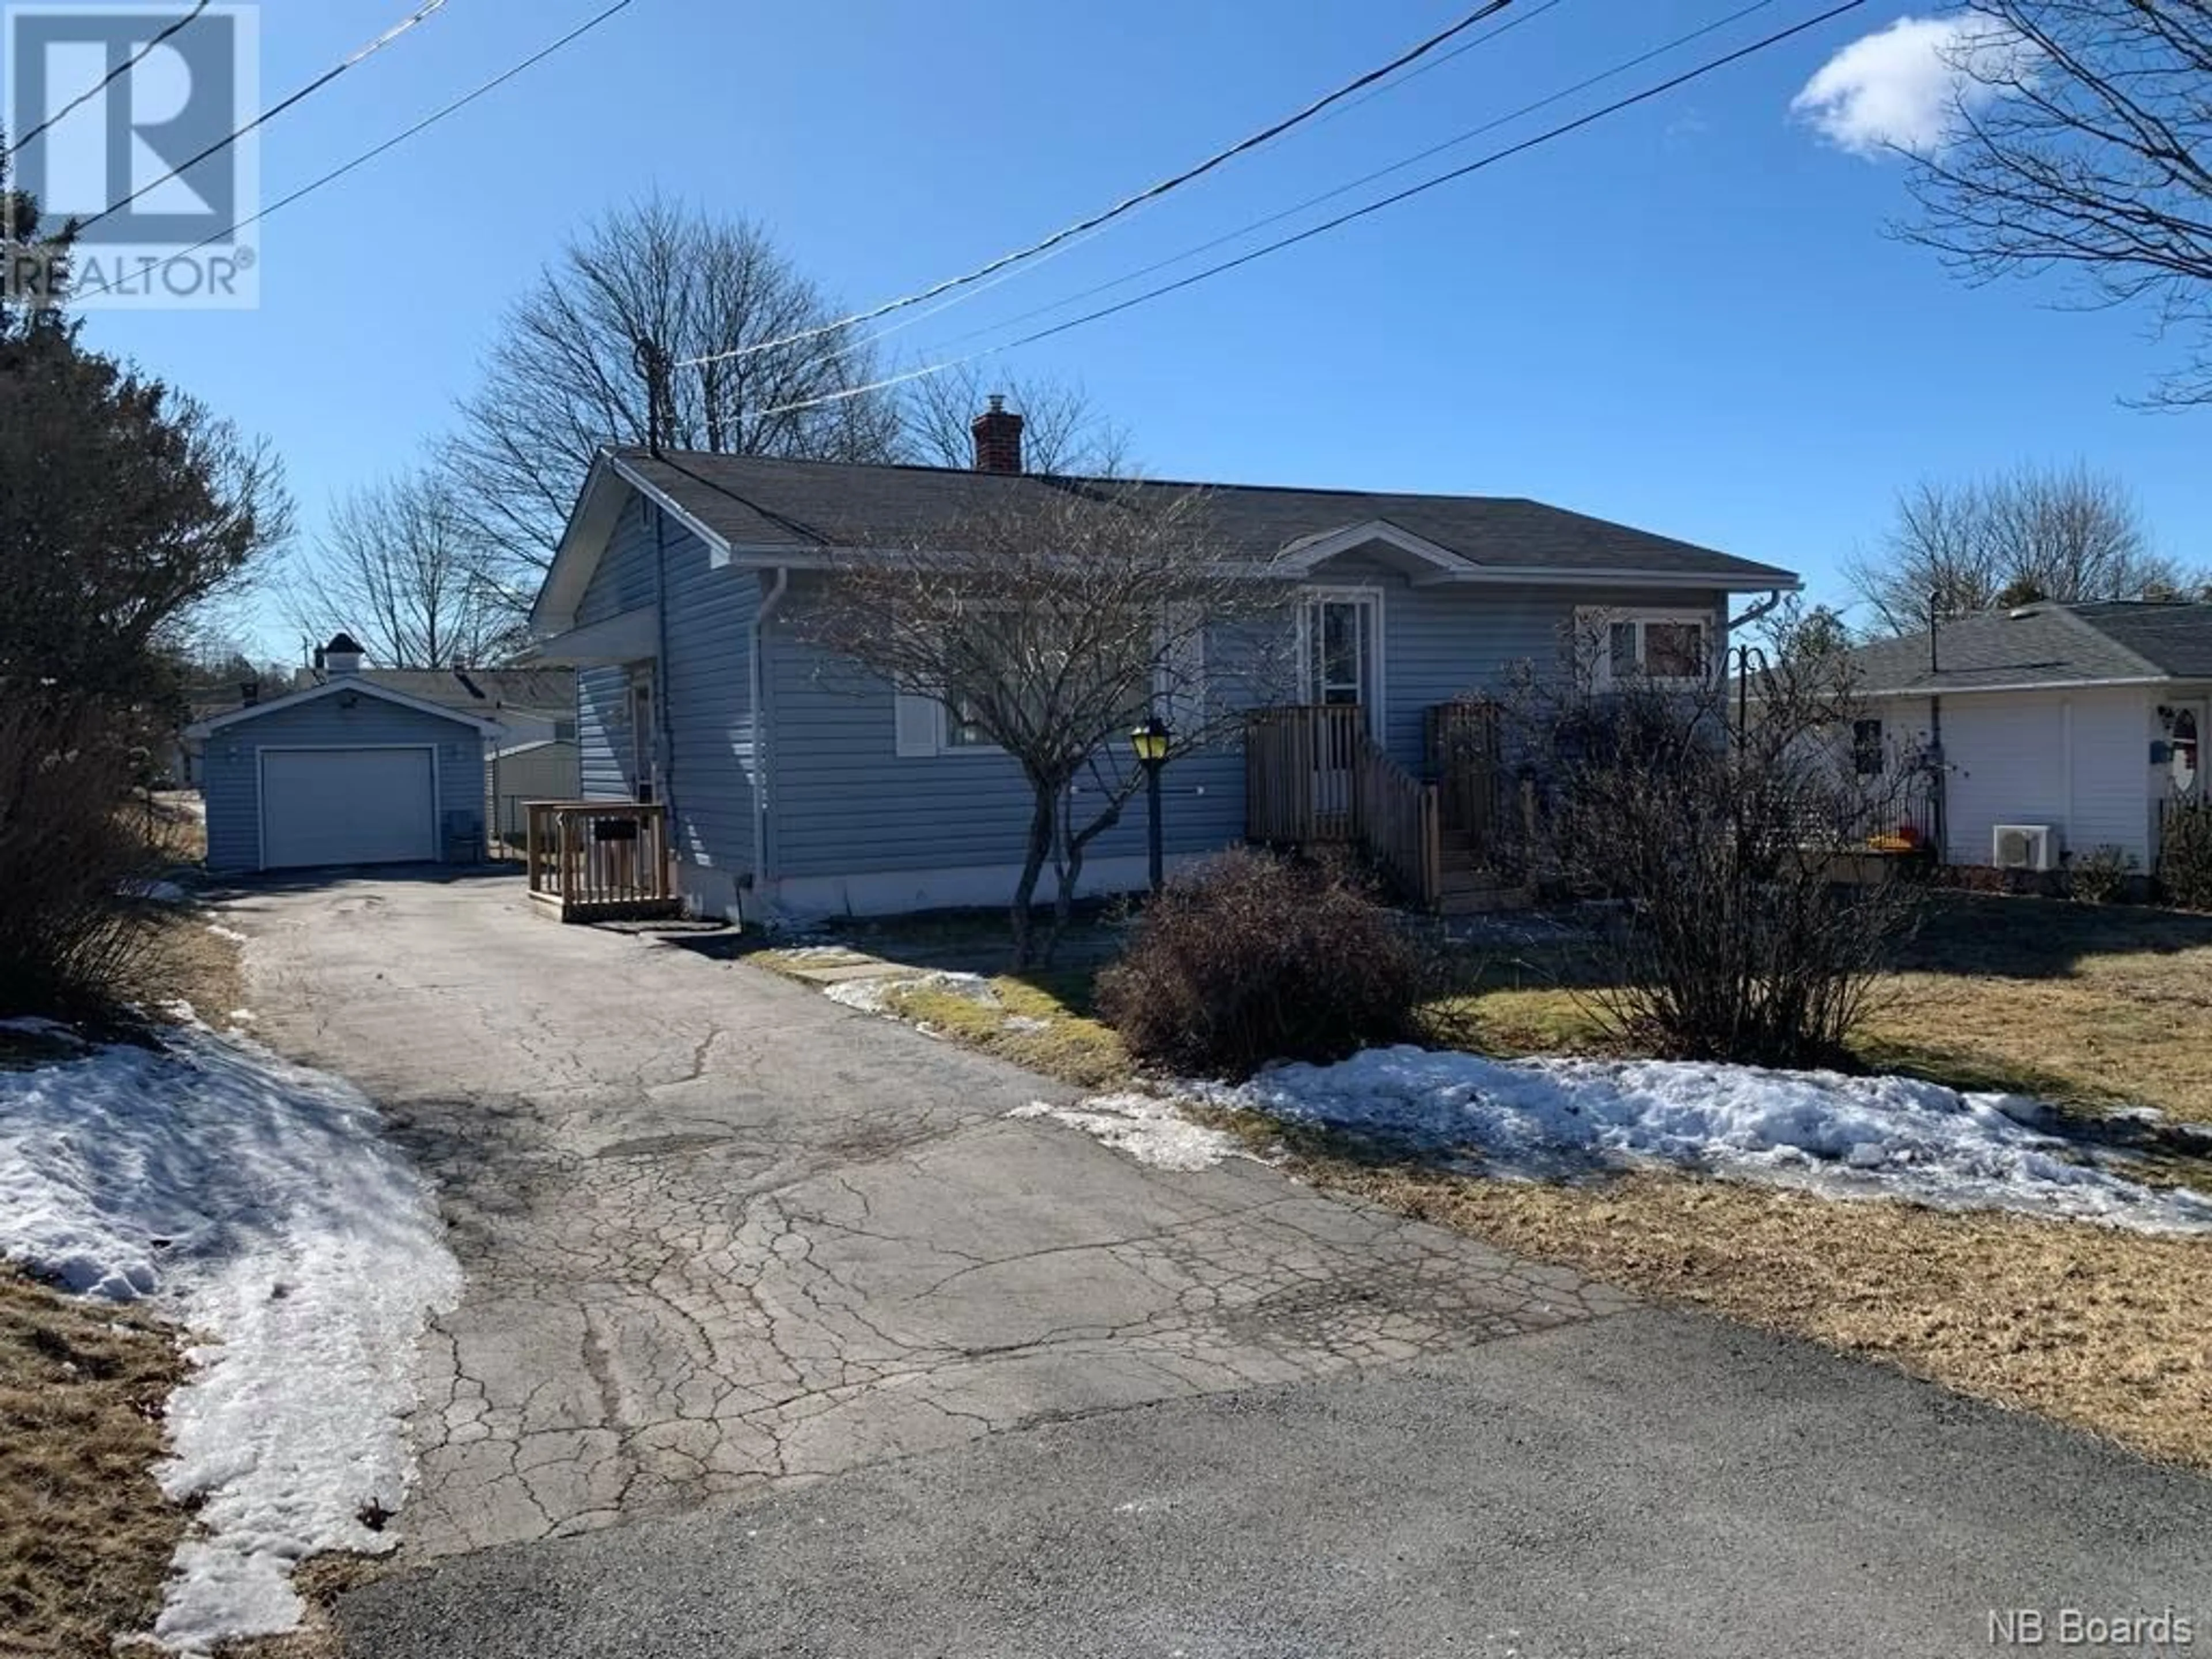 Home with unknown exterior material for 7 Elgin Road, Saint John New Brunswick E2J2Y6